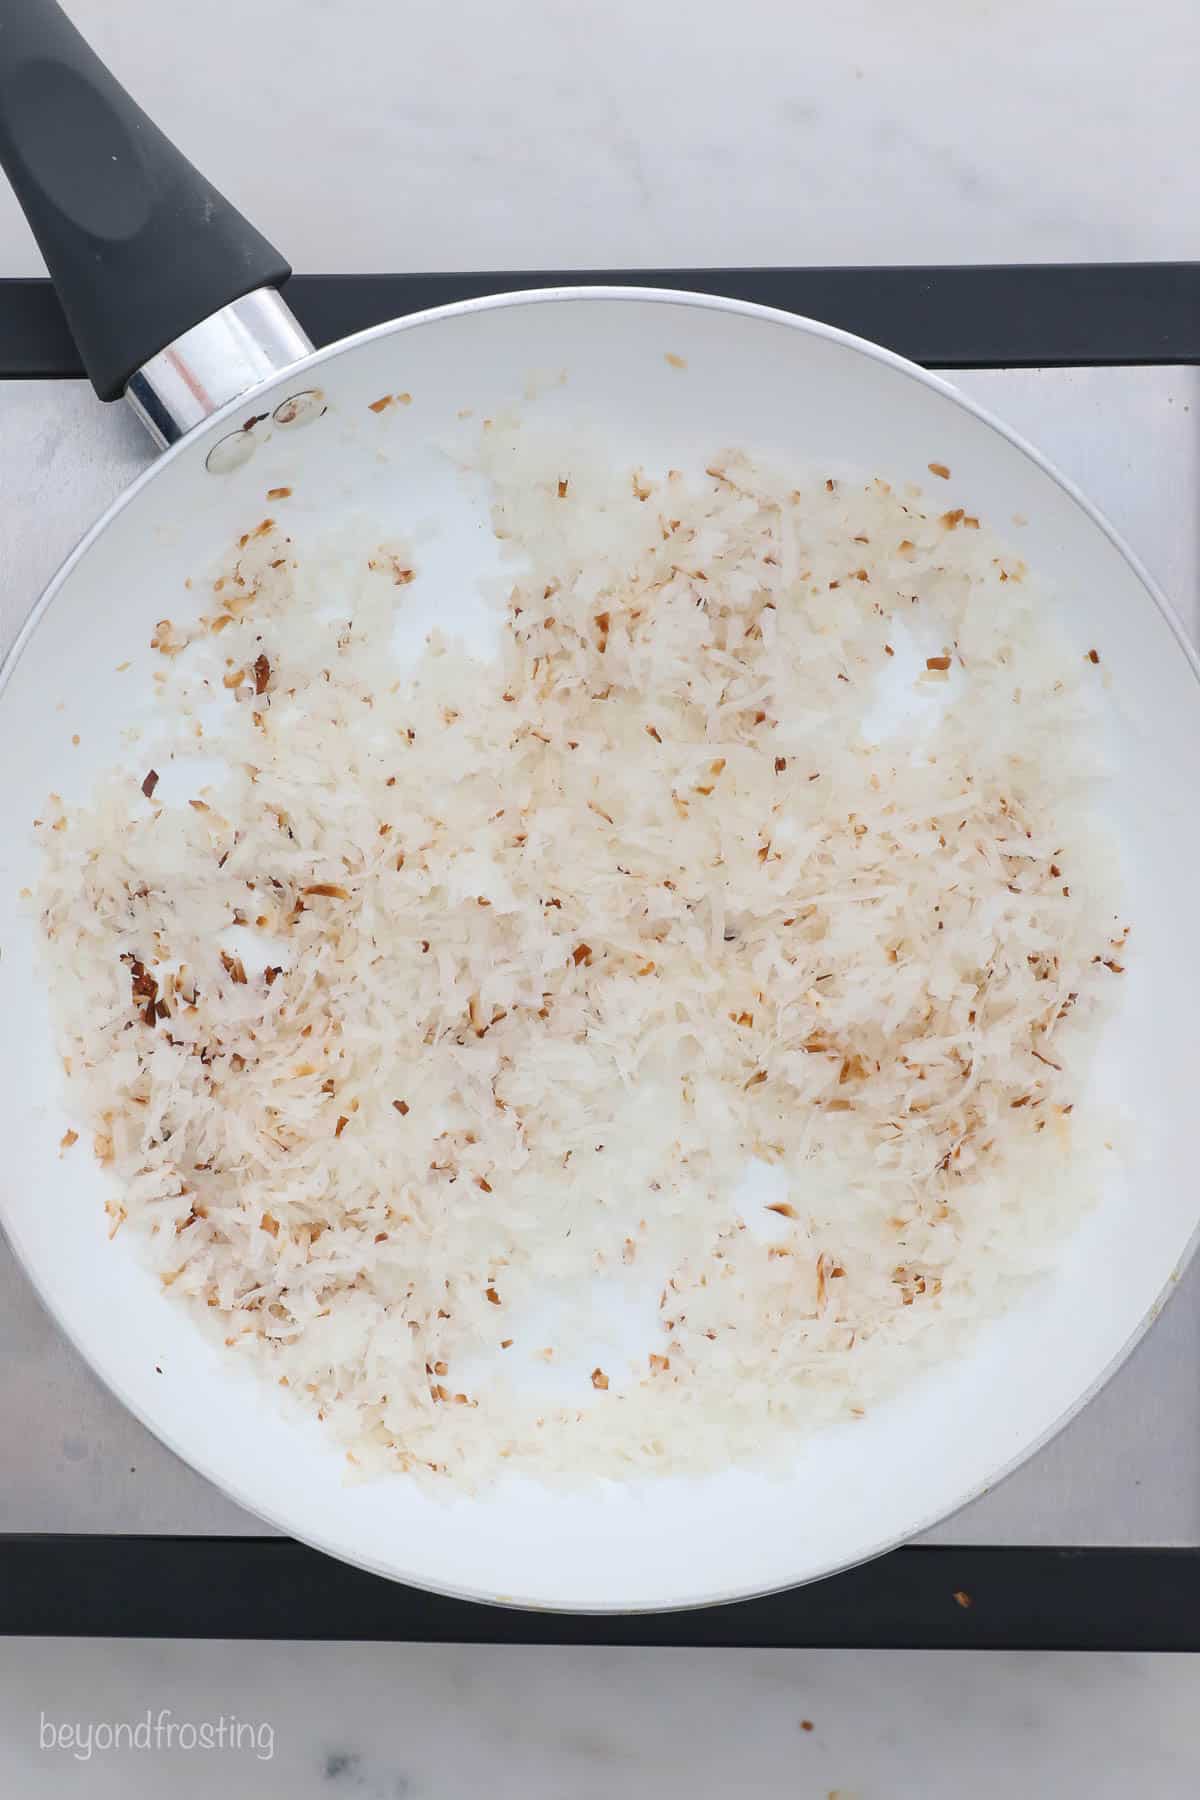 Coconut flakes in a skillet with a few browned